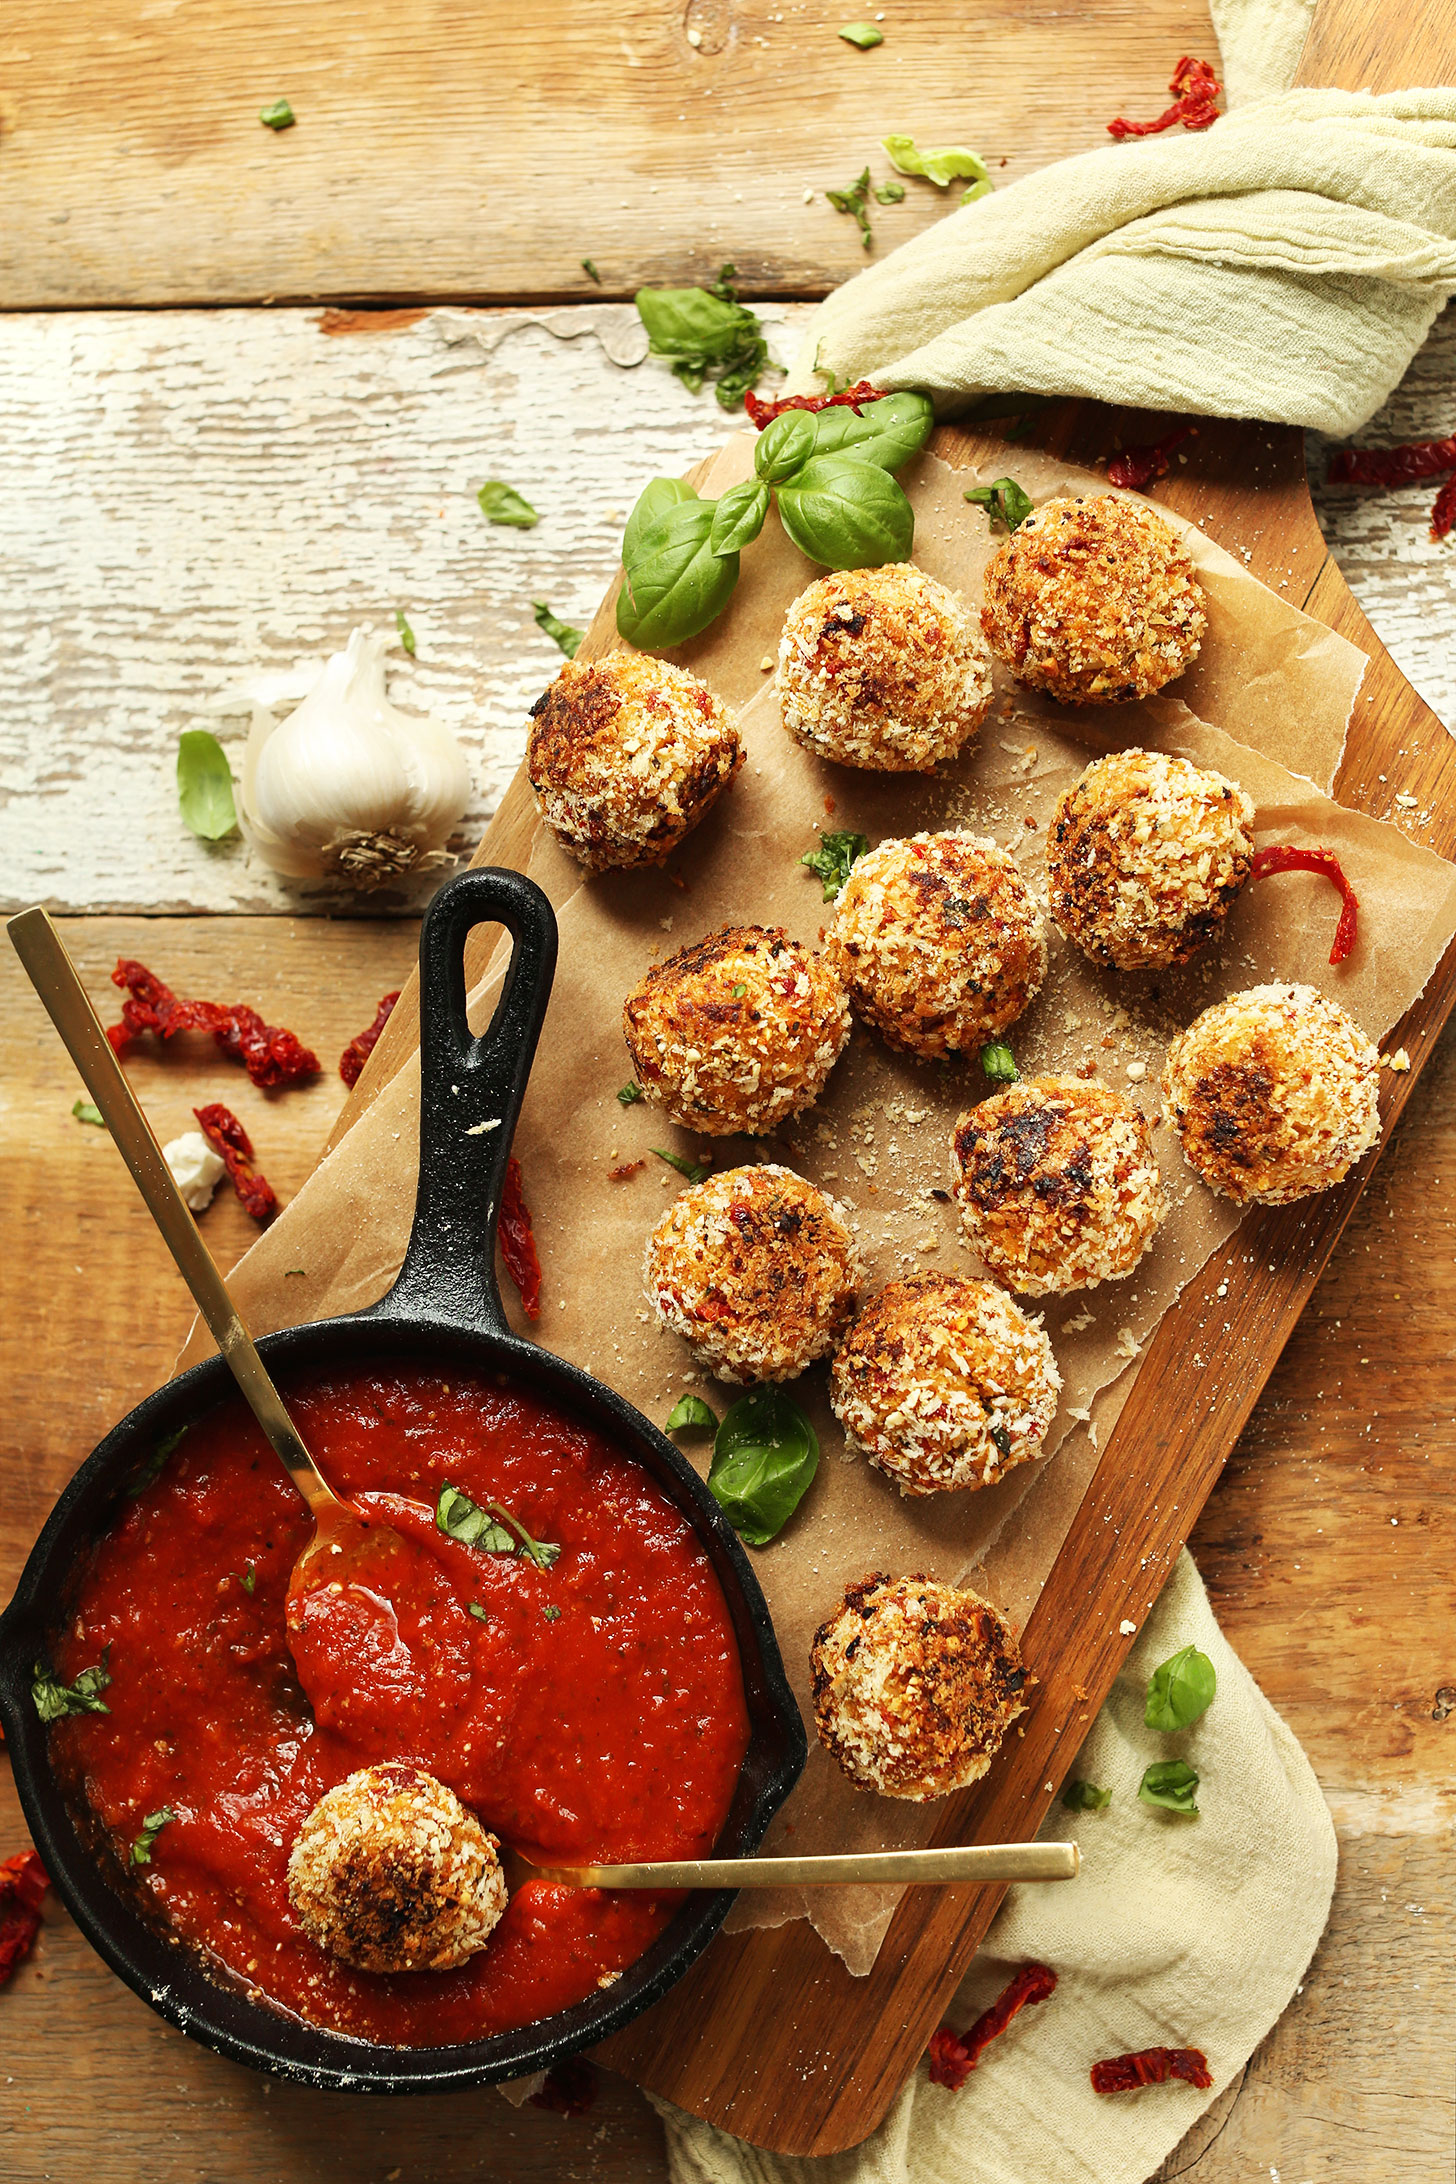 Platter of our healthy Vegan Arancini with a cast-iron skillet of warm marinara